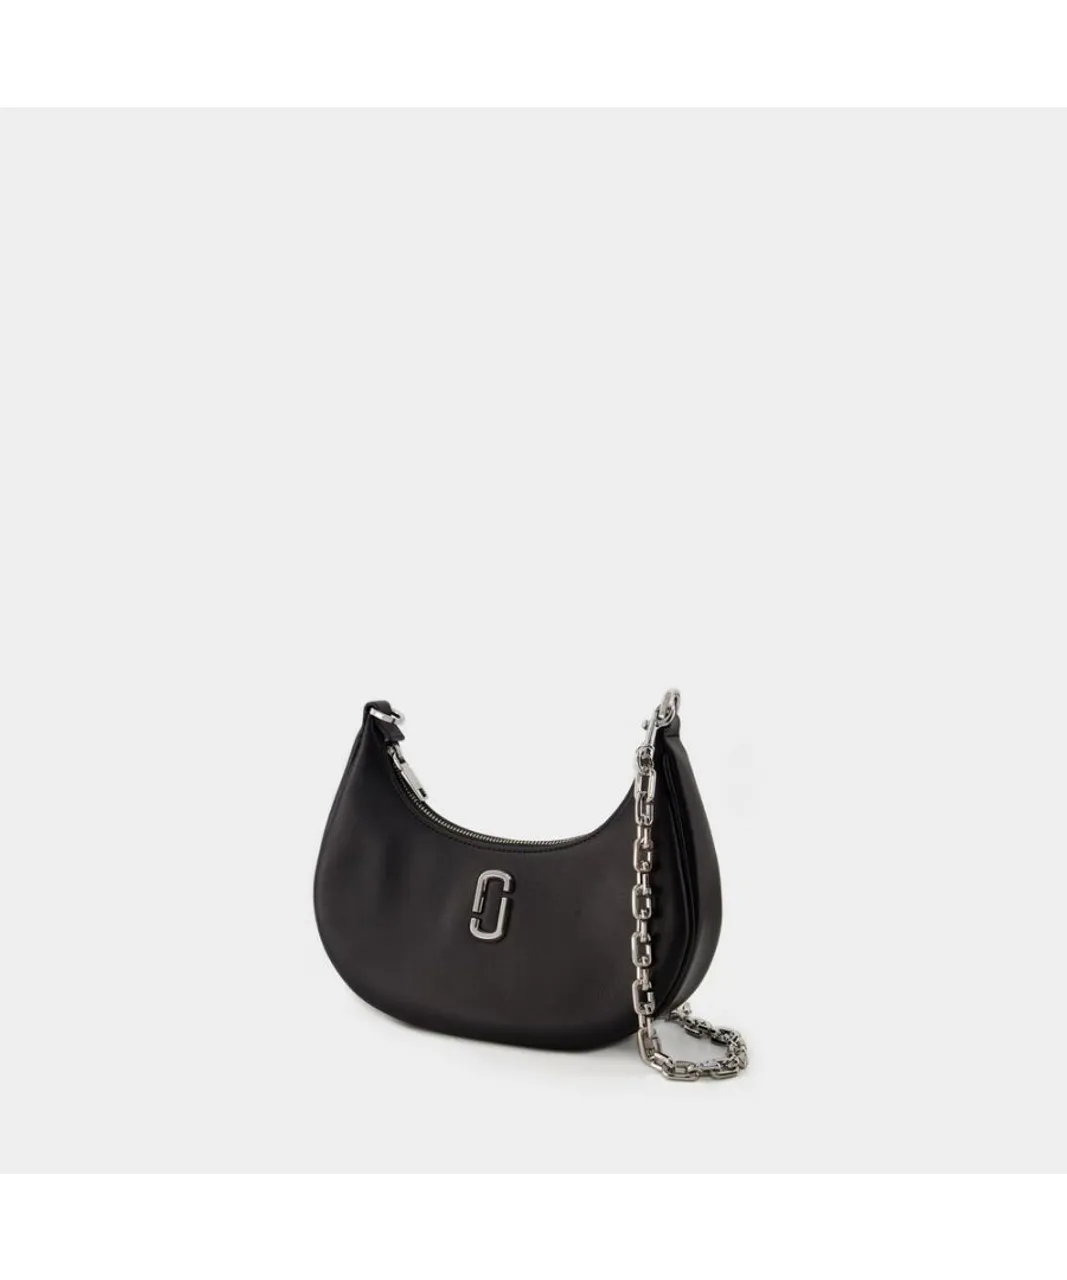 Marc Jacobs Womens The Curve Hobo Bag - - Leather - Black Calfskin - One Size